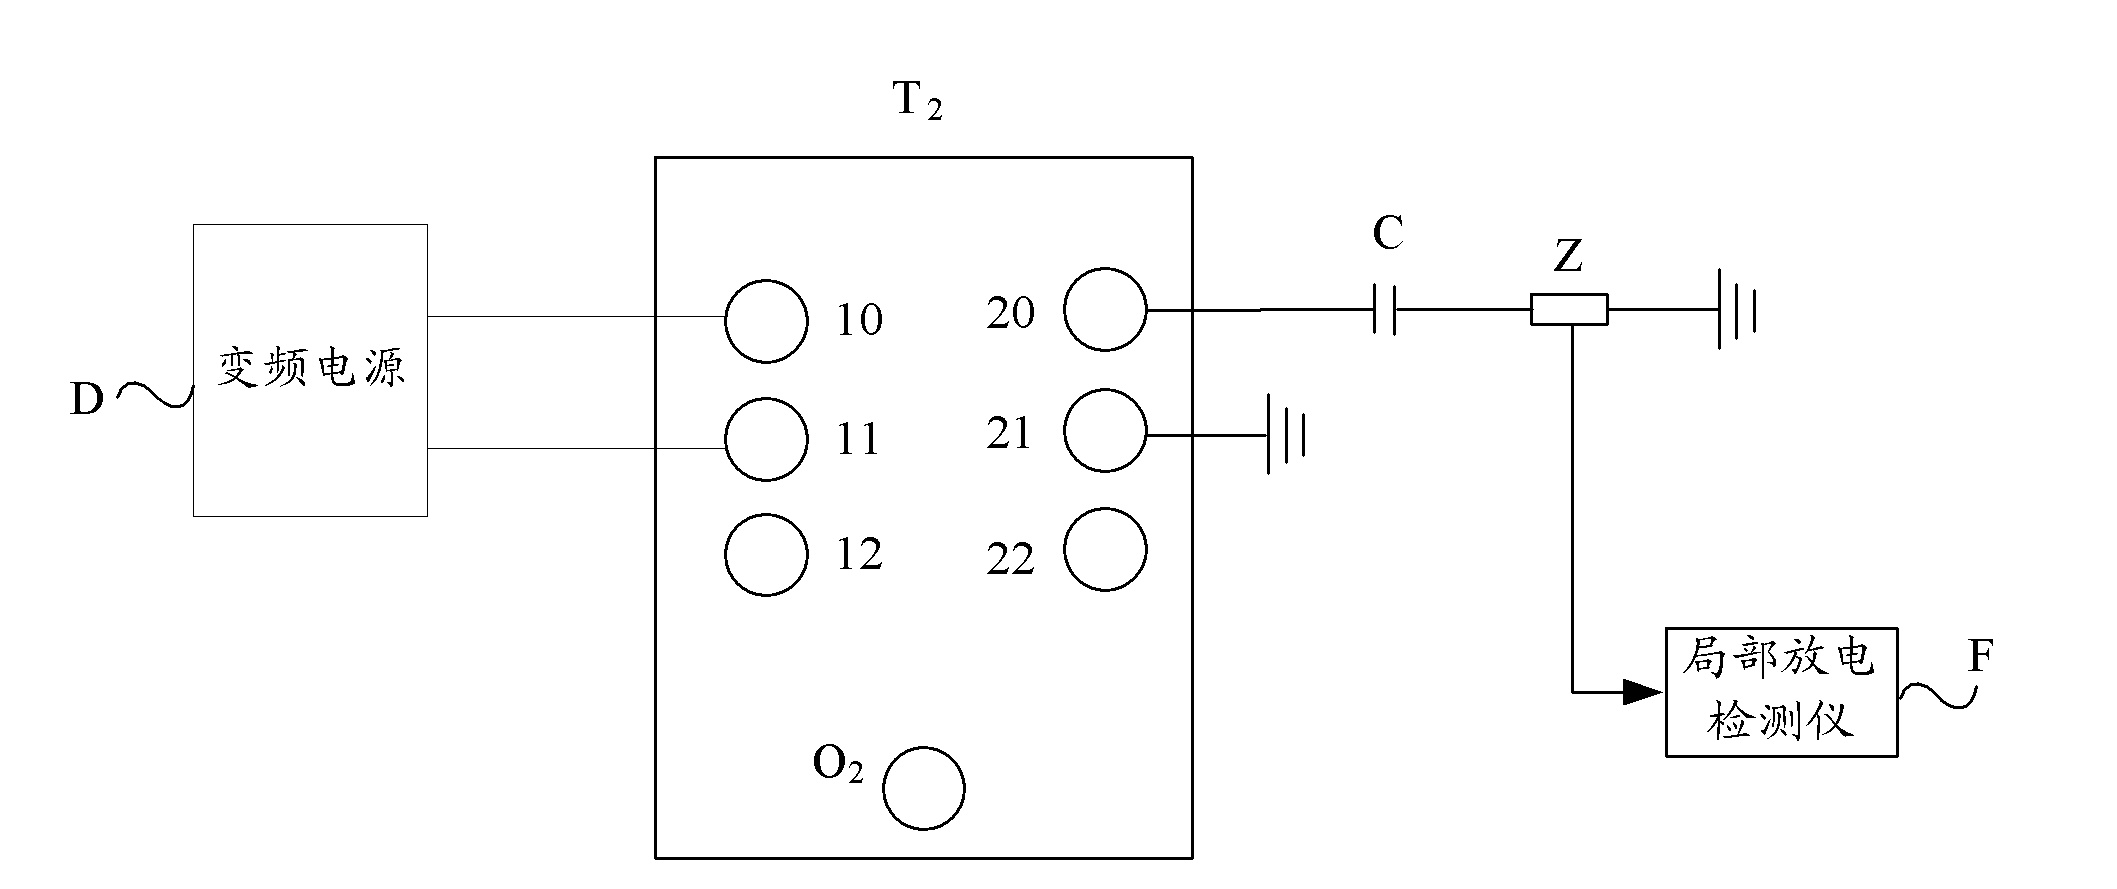 Wiring structure for partial discharge test of balance traction transformer